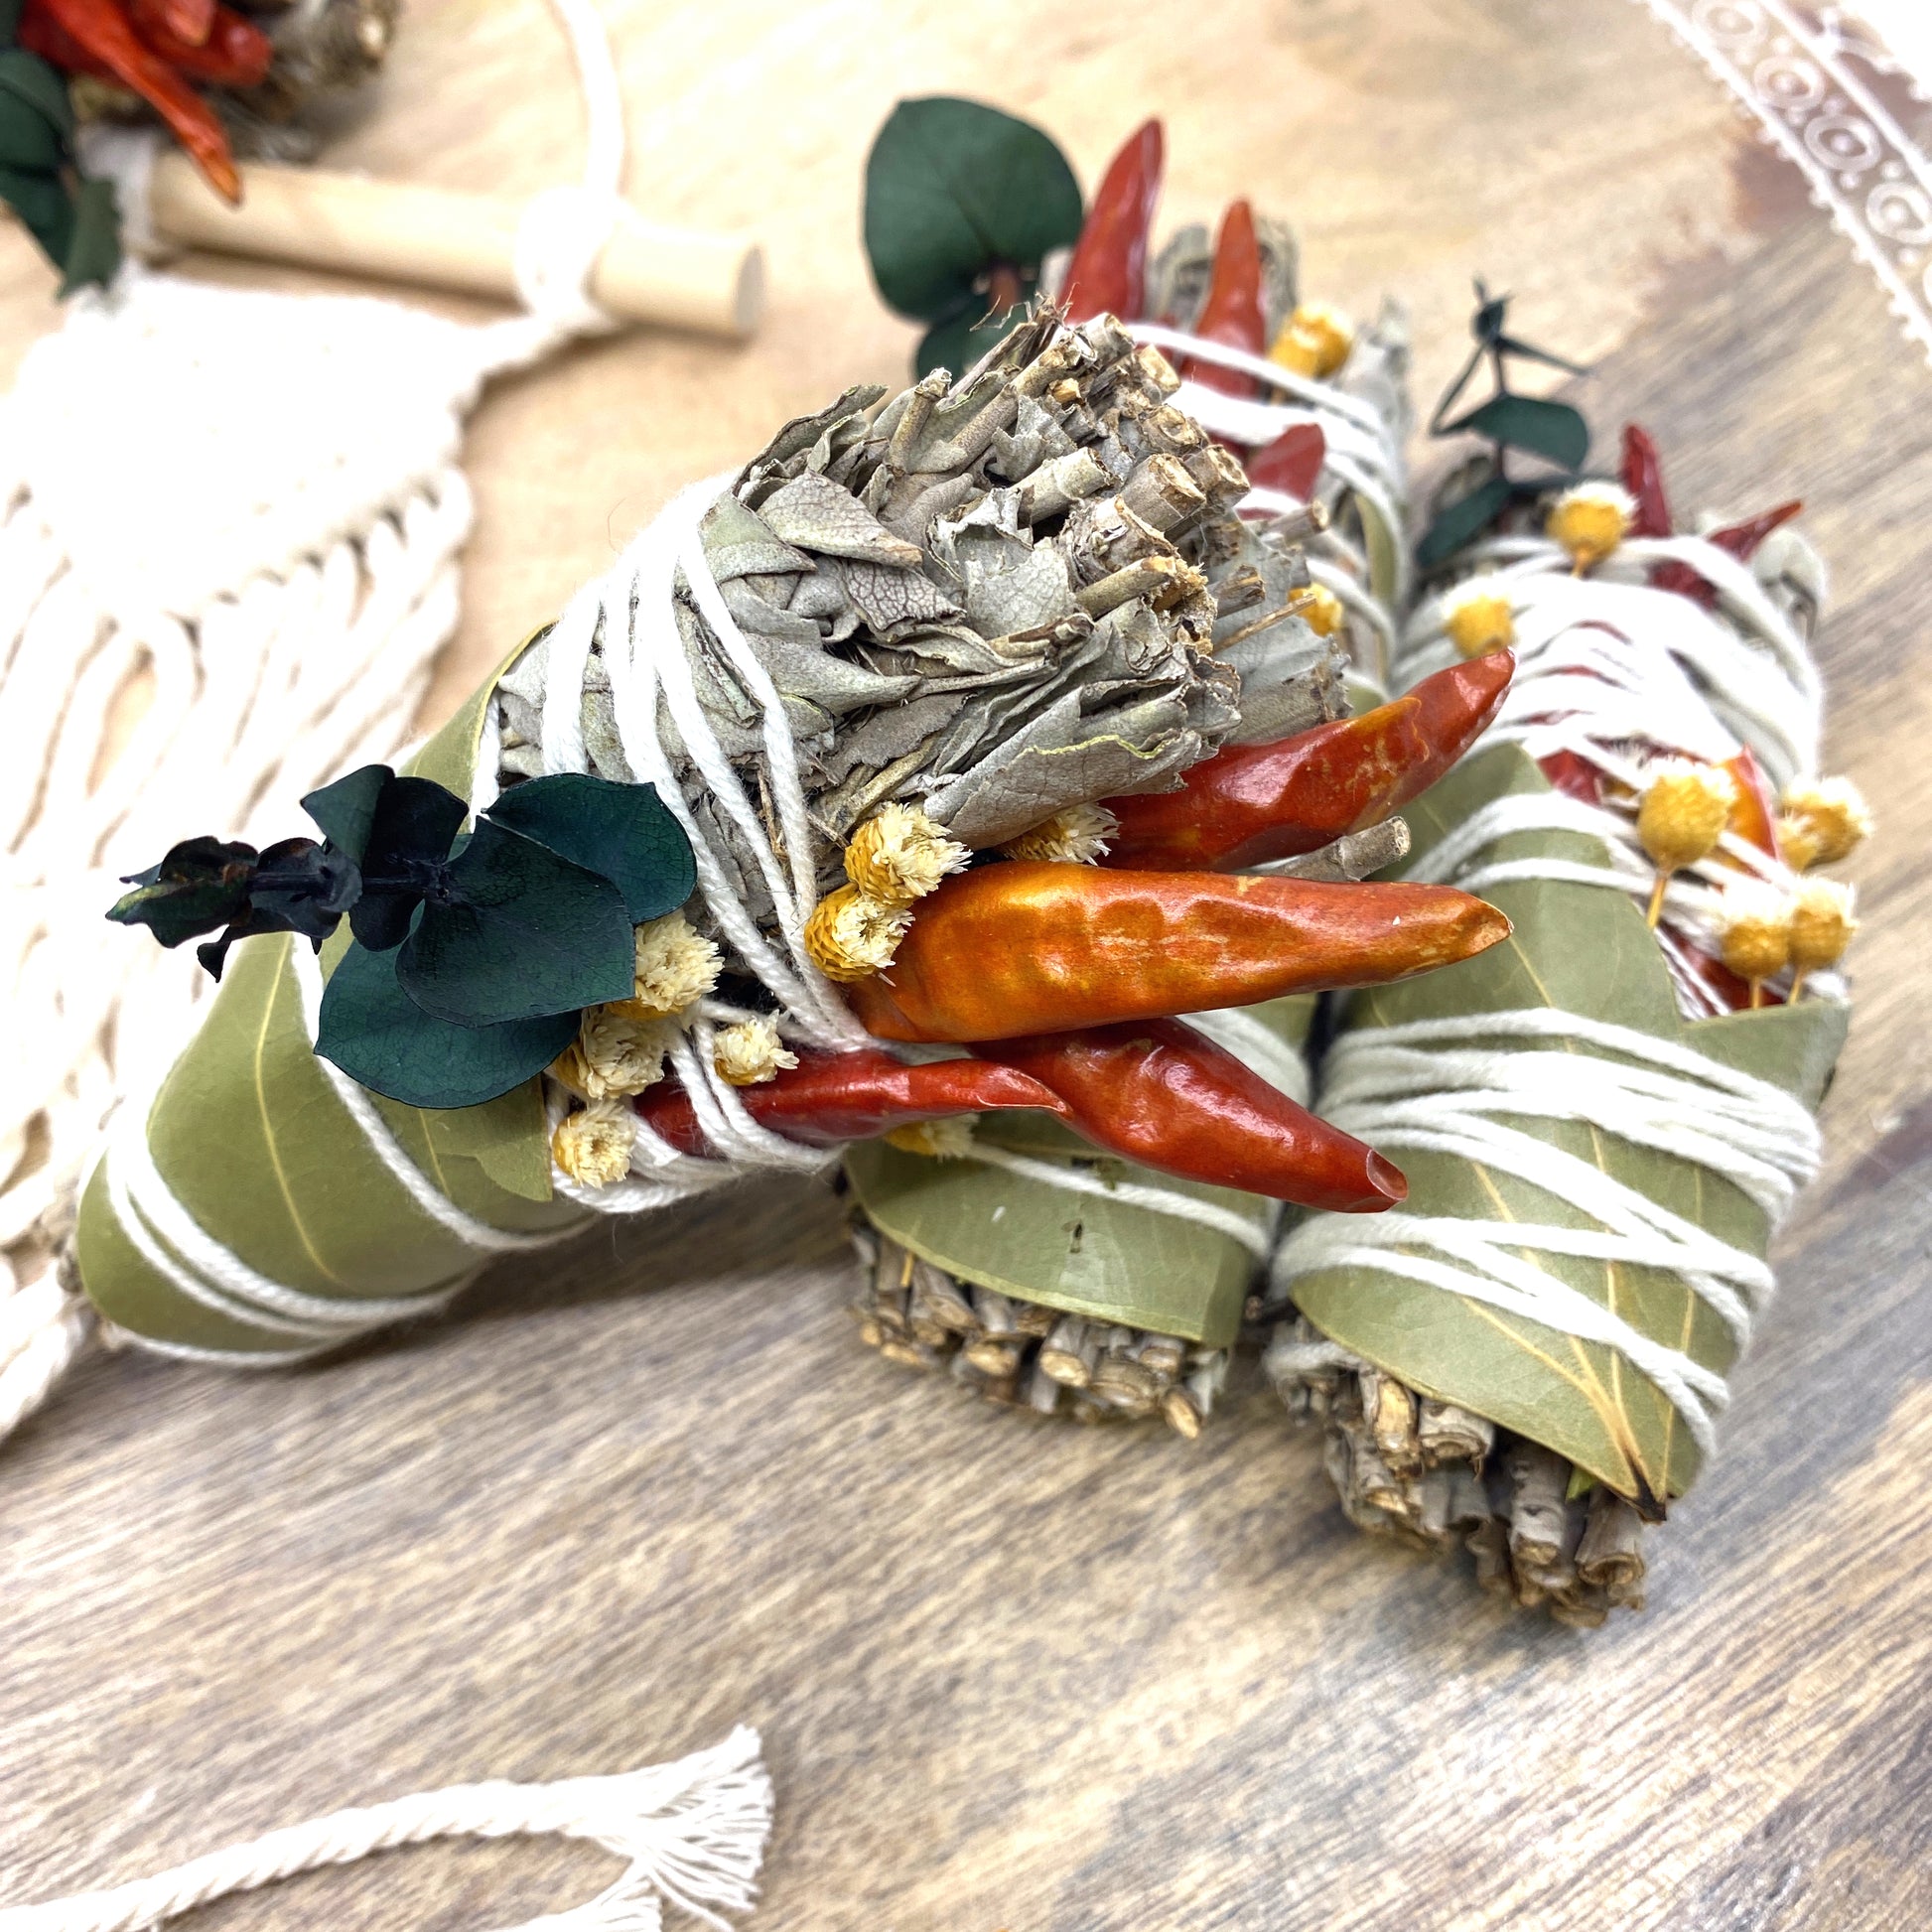 White Sage & Copal Smudge Stick with Red Chili Peppers, Bay Leaves,  4 " Sunsum®